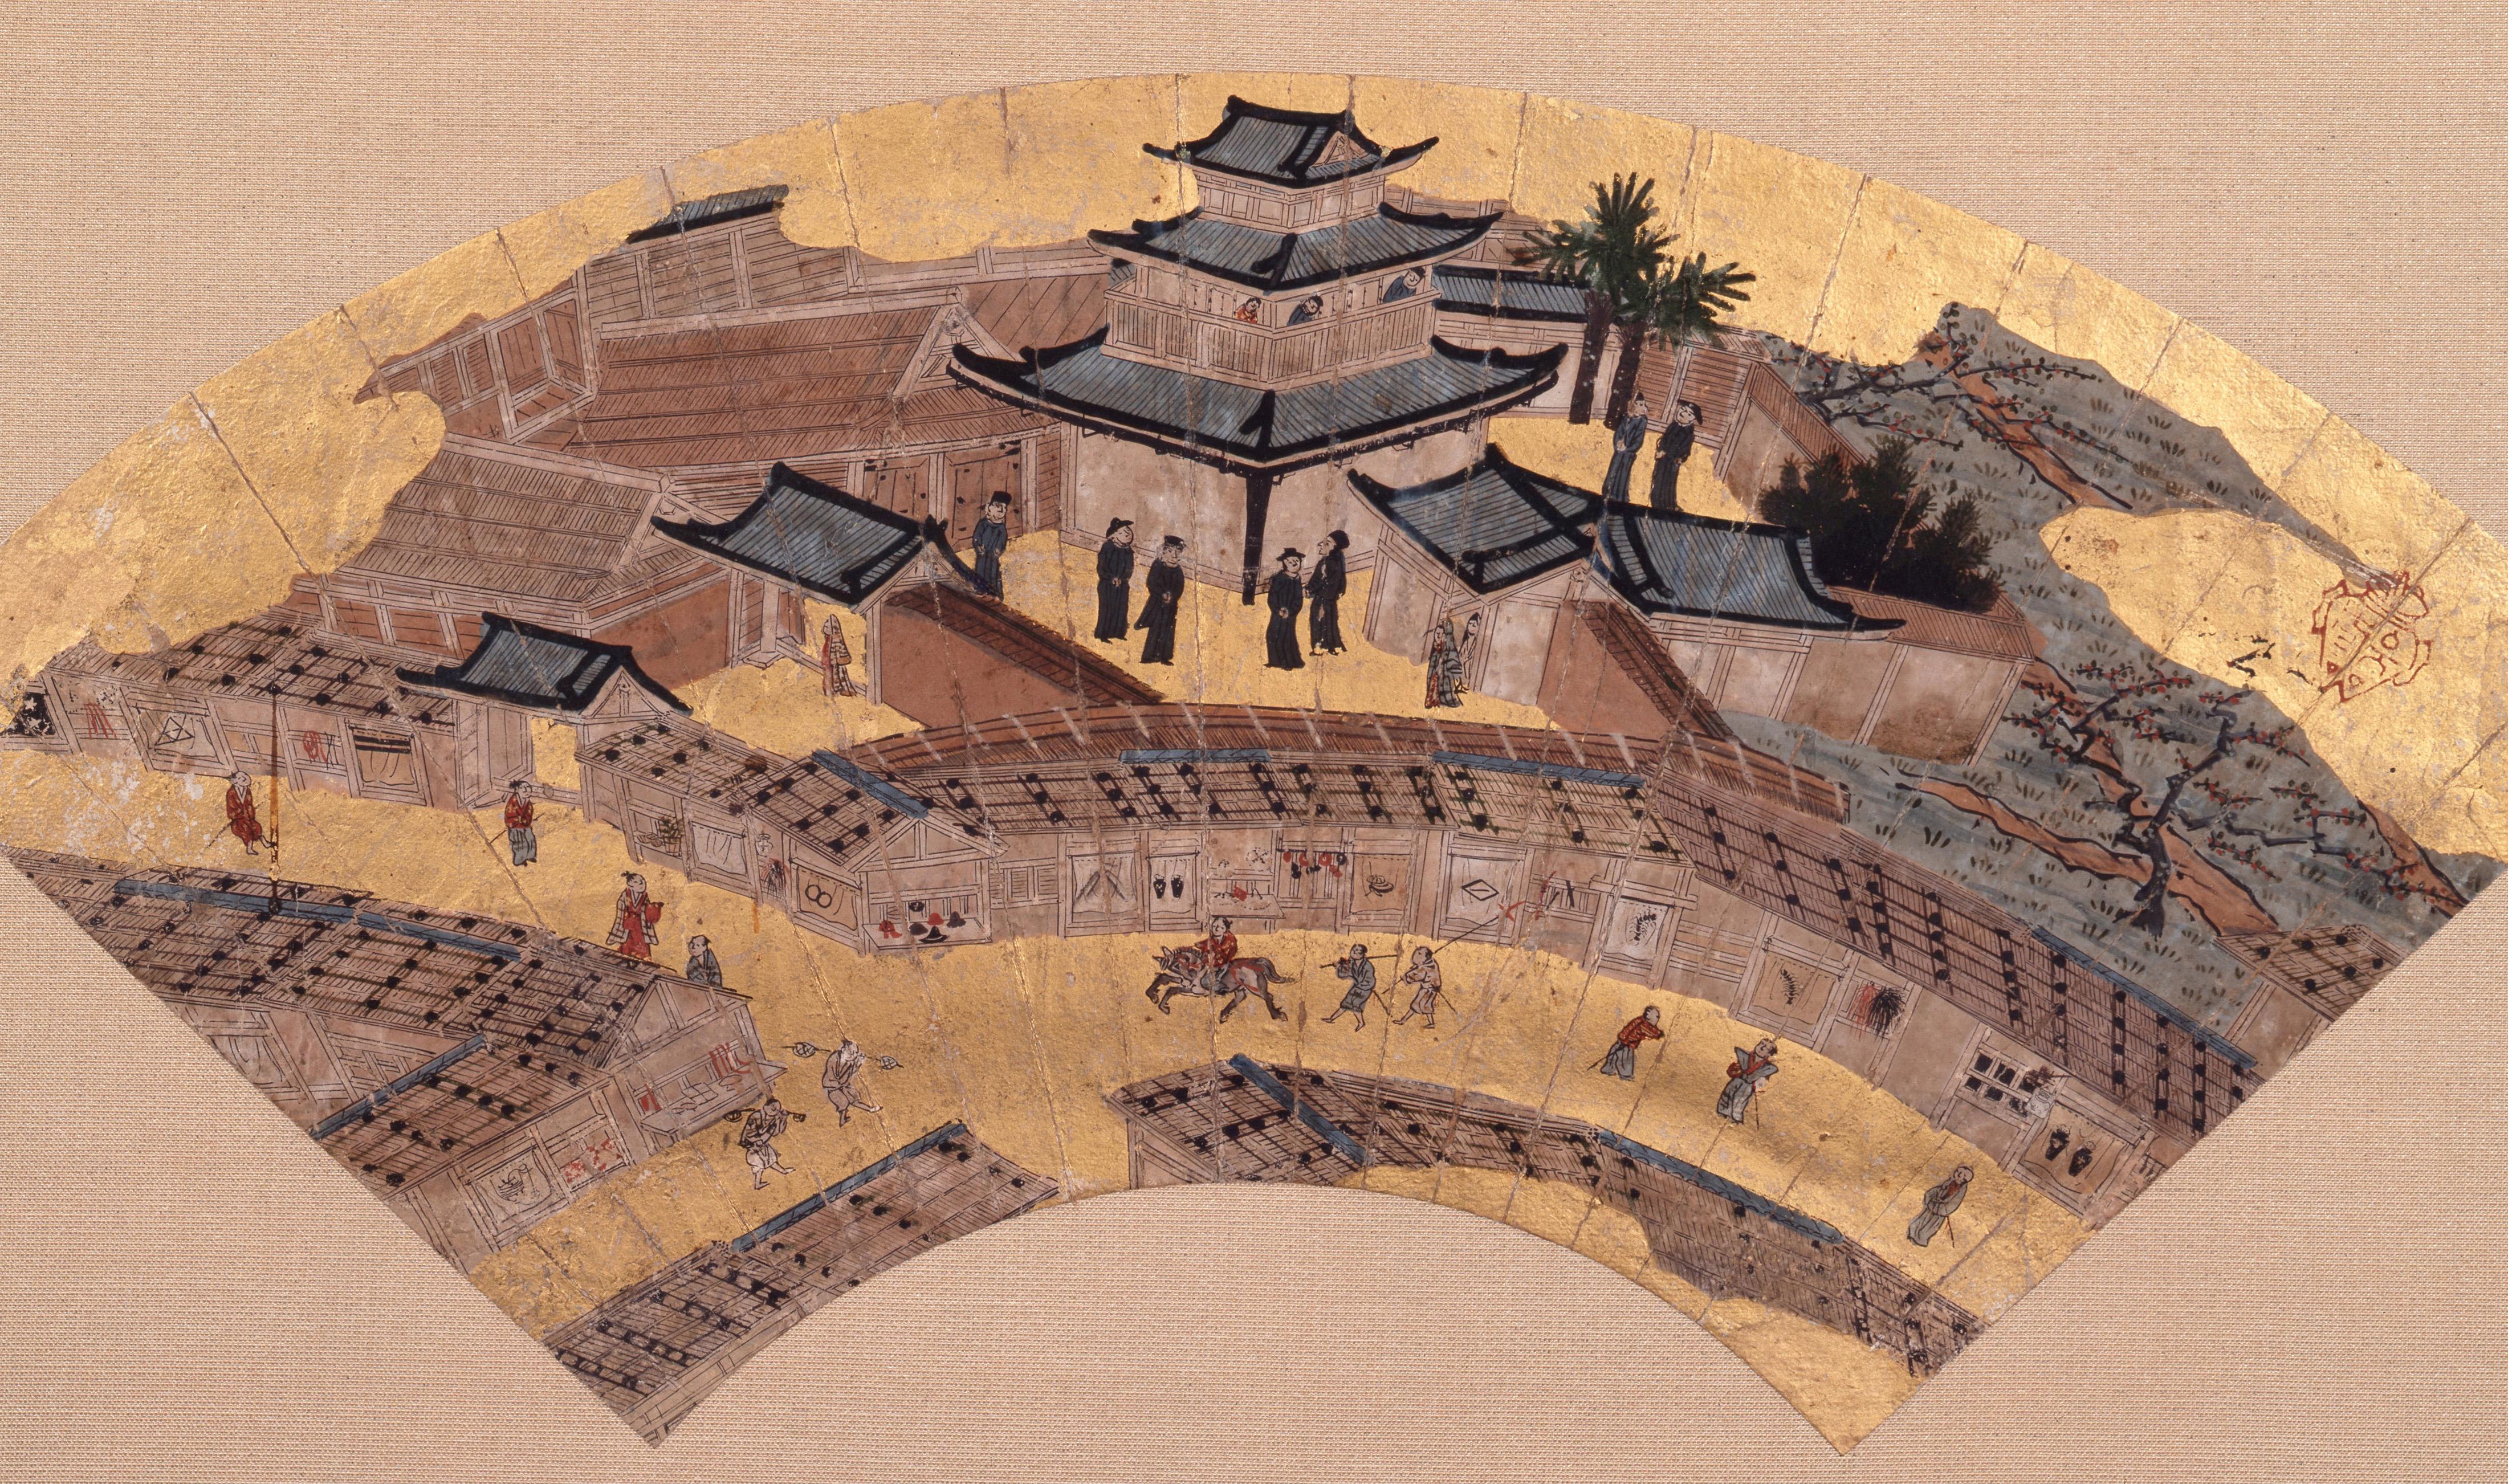 Earliest depiction of a Christian church in Japan, Kanō Sōshū. Kyoto, 16th century. The church was demolished in 1587 by order of Toyotomi Hideyoshi.jpeg